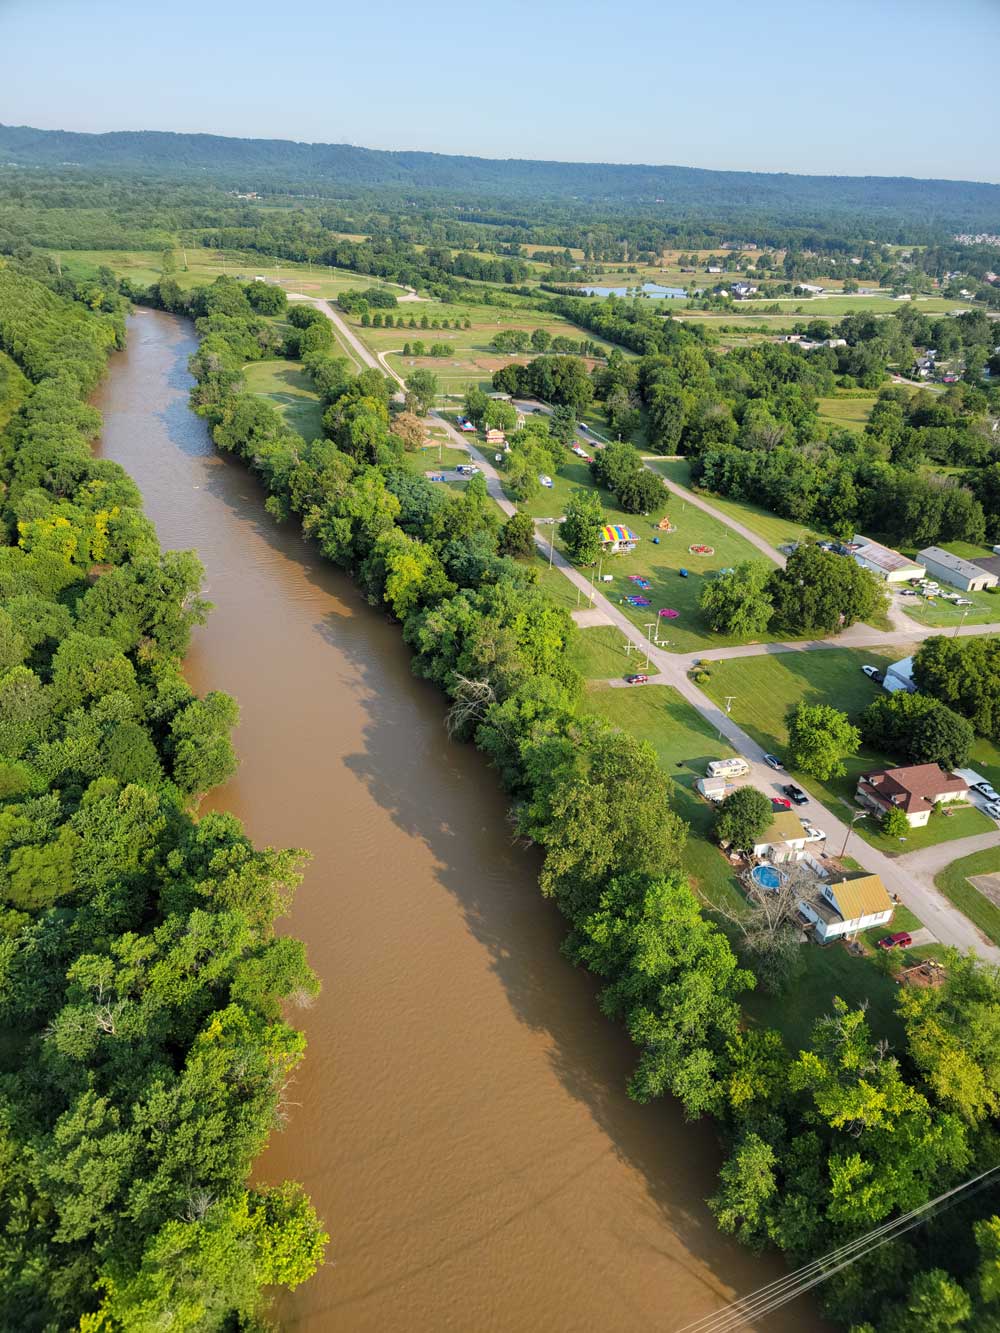 the river running next to the City of Shepherdsville